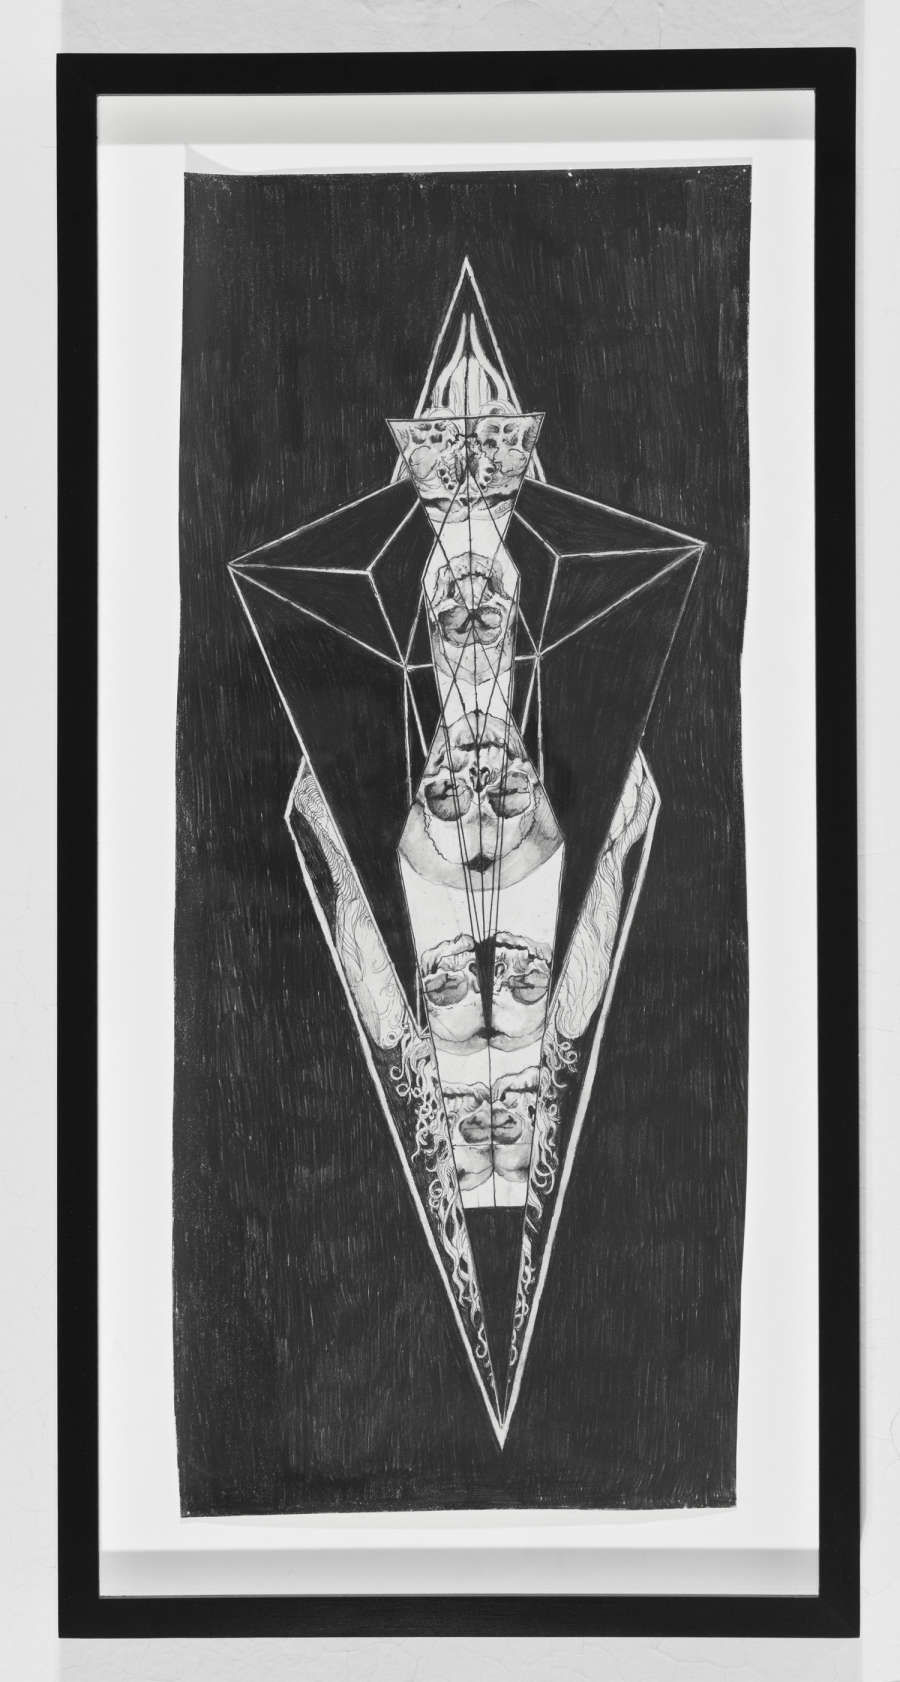 Graphite drawing, mostly black, of diamond shaped geometric lines and skulls doubled and reflected inside of the diamond.